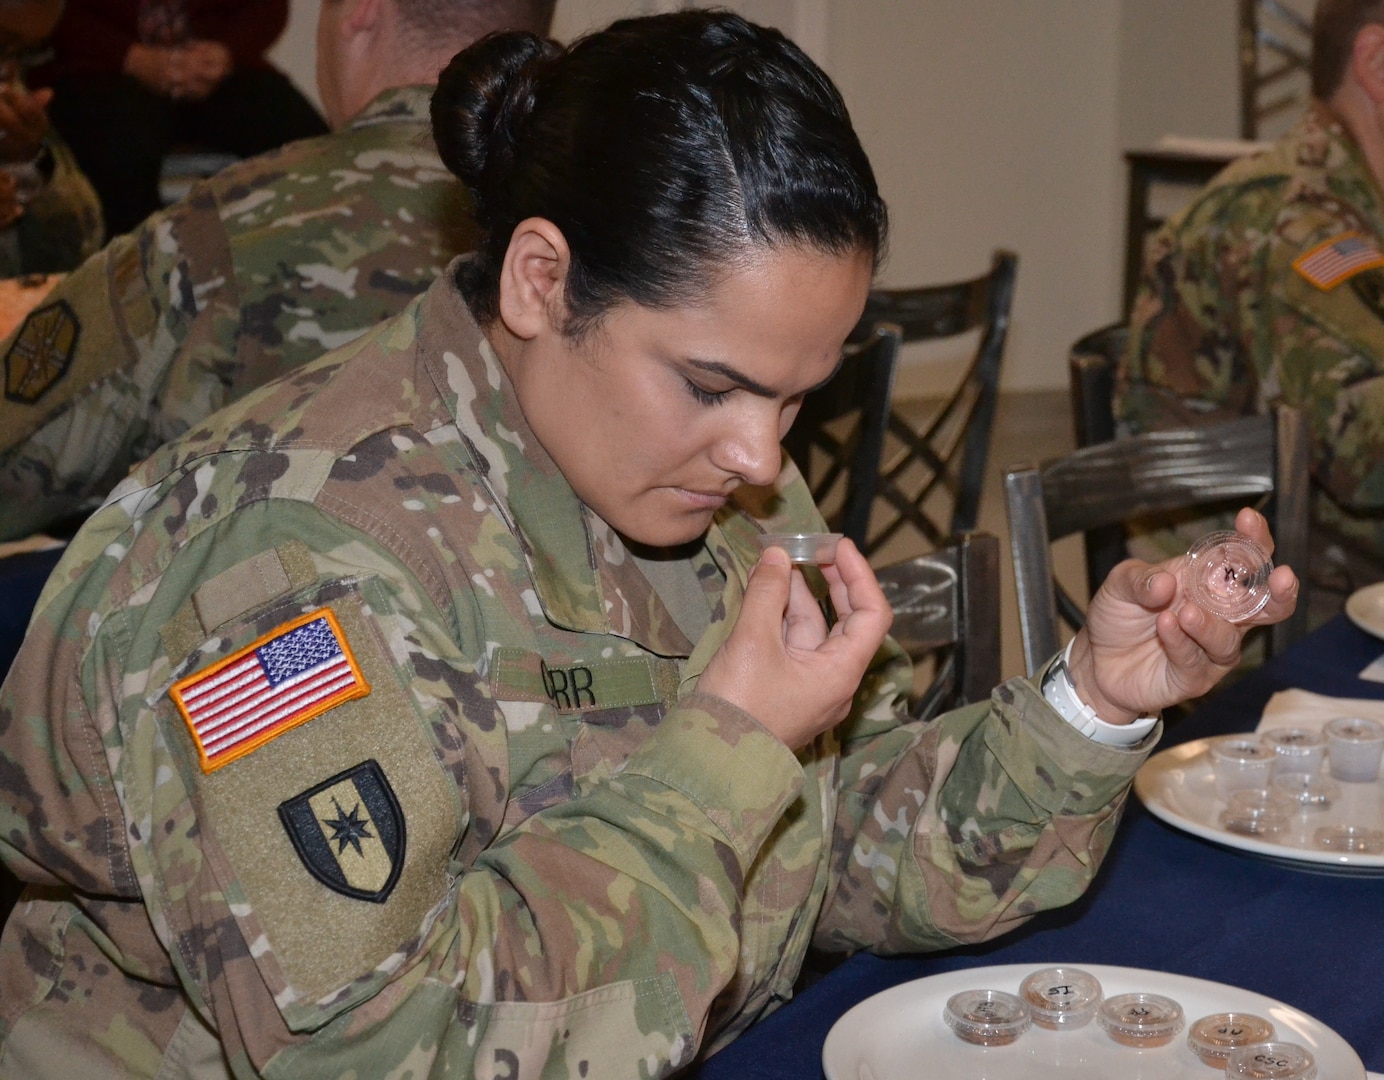 Capt. Liela Carr, 232nd Medical Battalion company commander, smells the aroma of spices during a meditation exercise for “The Gift of Presence: Resiliency Reset” event at the Vogel Resiliency Center at Joint Base San Antonio-Fort Sam Houston Nov. 30.